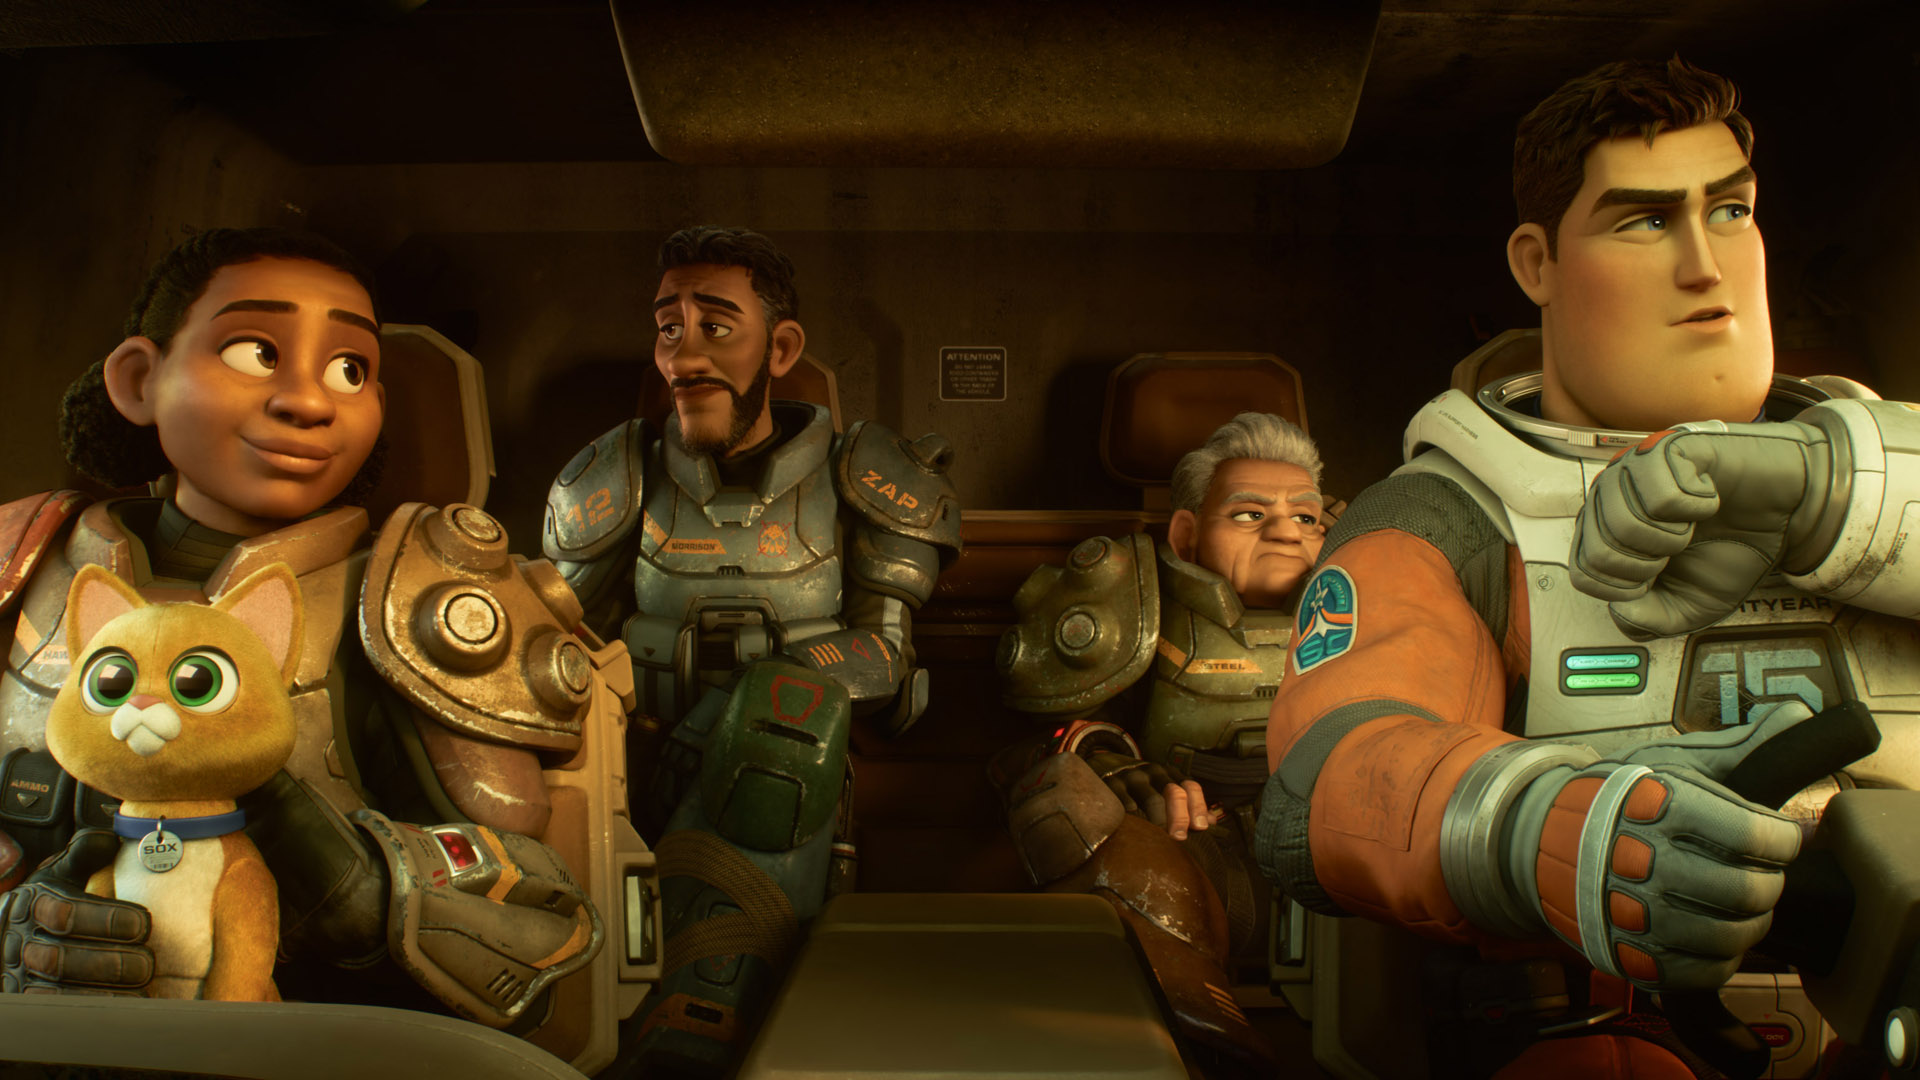 Buzz and his new crew go in search of a new ship in Pixar's Lightyear movie